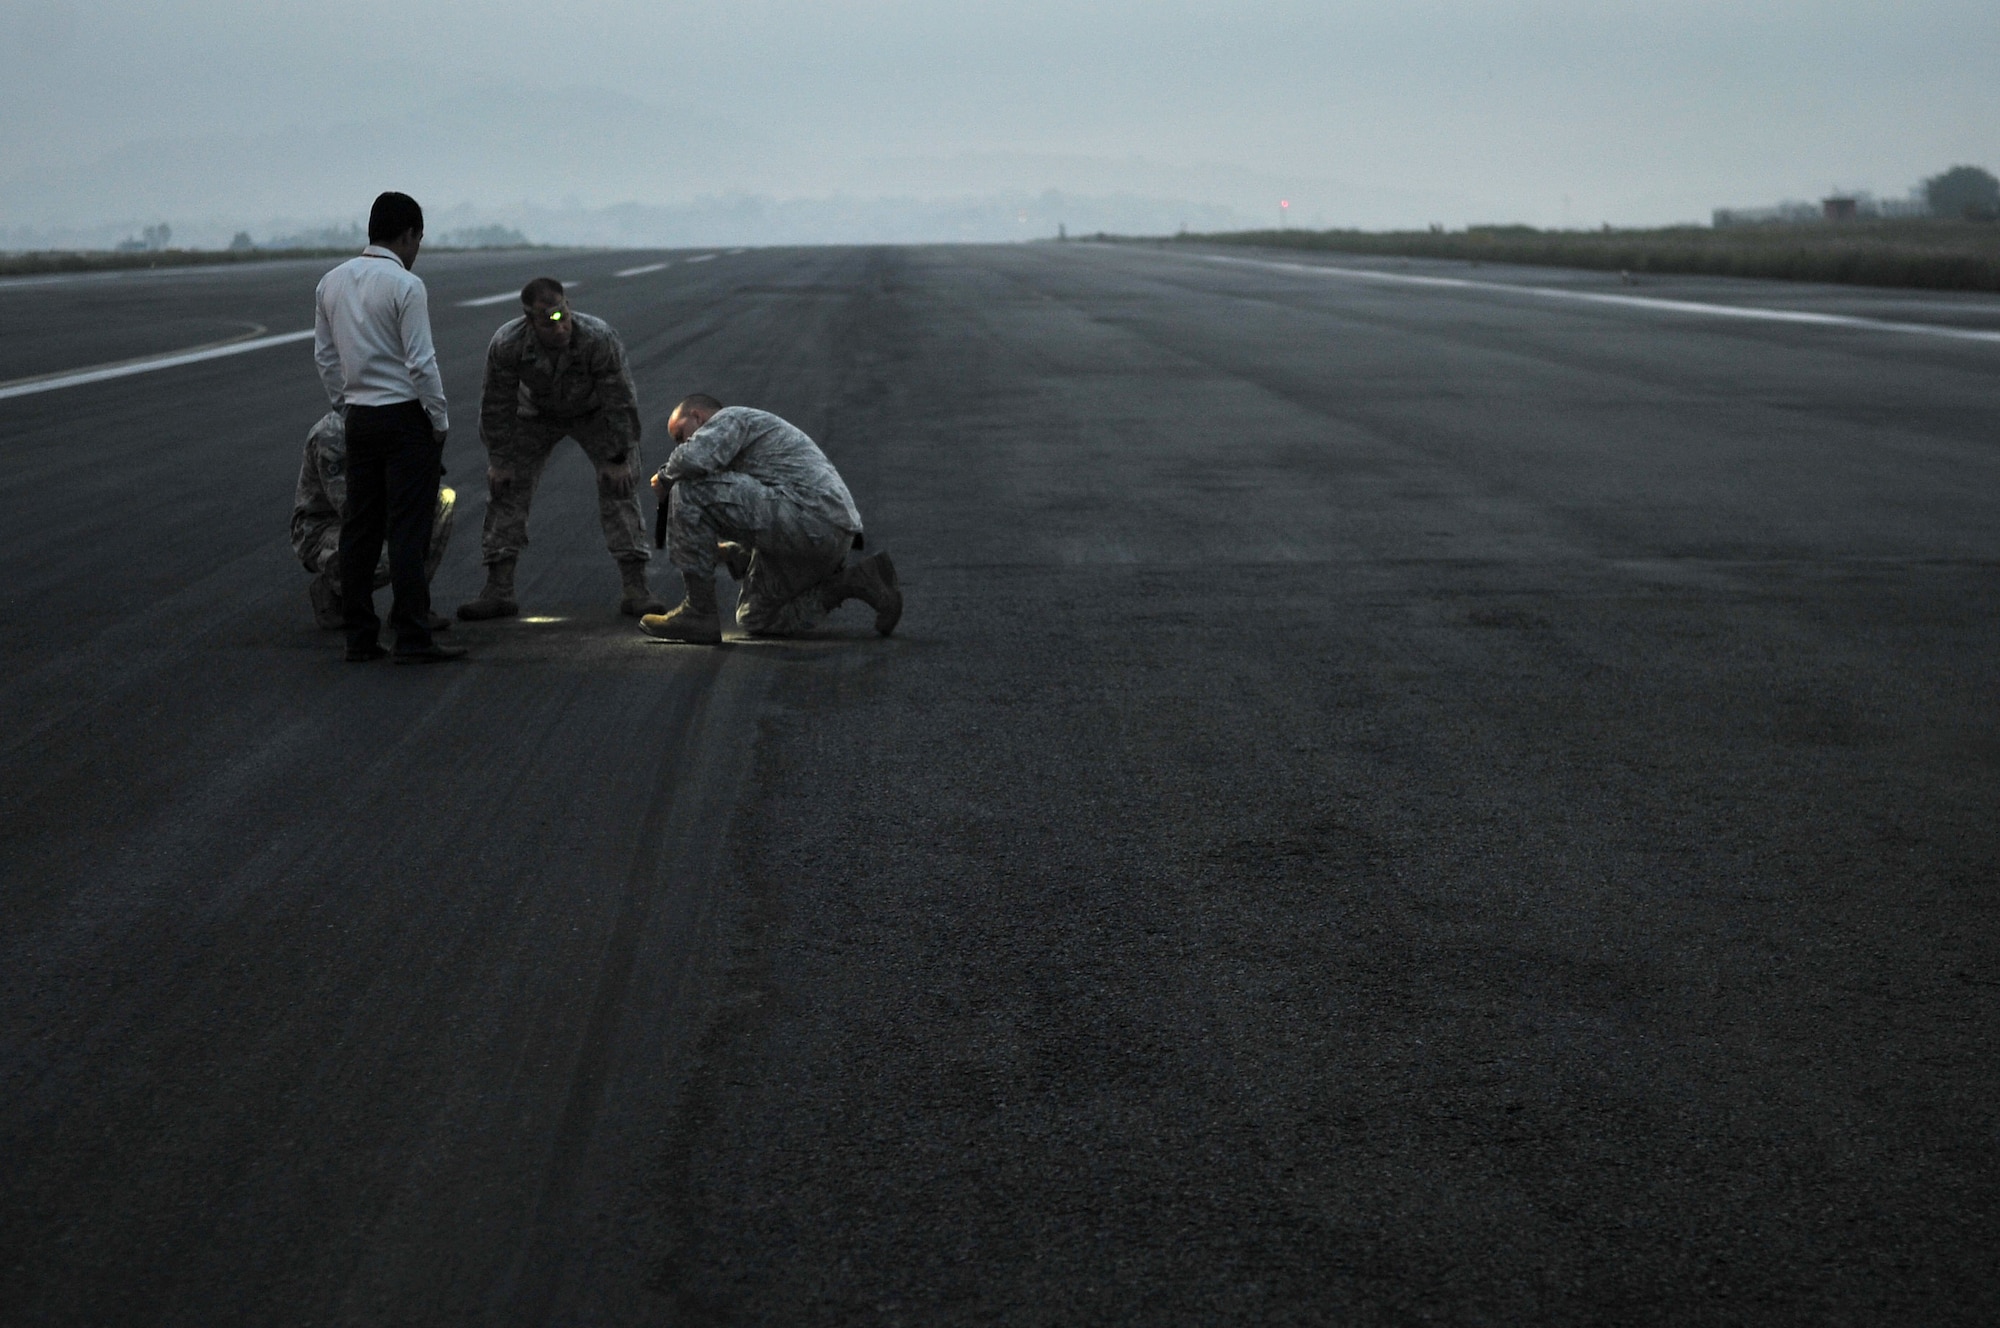 A Civil Aviation Authority Nepal member and U.S. Air Force 36th Contingency Response Group Airmen attached to Joint Task Force-505 conduct a physical assessment of the runway at the Tribhuvan International Airport in Kathmandu, Nepal, May 10, 2015. The Nepalese officials and Airmen plan to continue doing daily visual assessments to ensure the integrity of the runway remains intact and to identify any additional repairs if necessary after it sustained damage following a magnitude 7.8 earthquake that struck the nation April 25, 2015. In response to the Nepal earthquake, the U.S. military sent Airmen, Marines, Soldiers and Sailors as part of JTF-505 to support the humanitarian assistance and disaster relief mission in Nepal at the direction of U.S. Agency for International Development.(U.S. Air Force photo by Staff Sgt. Melissa B. White/Released)